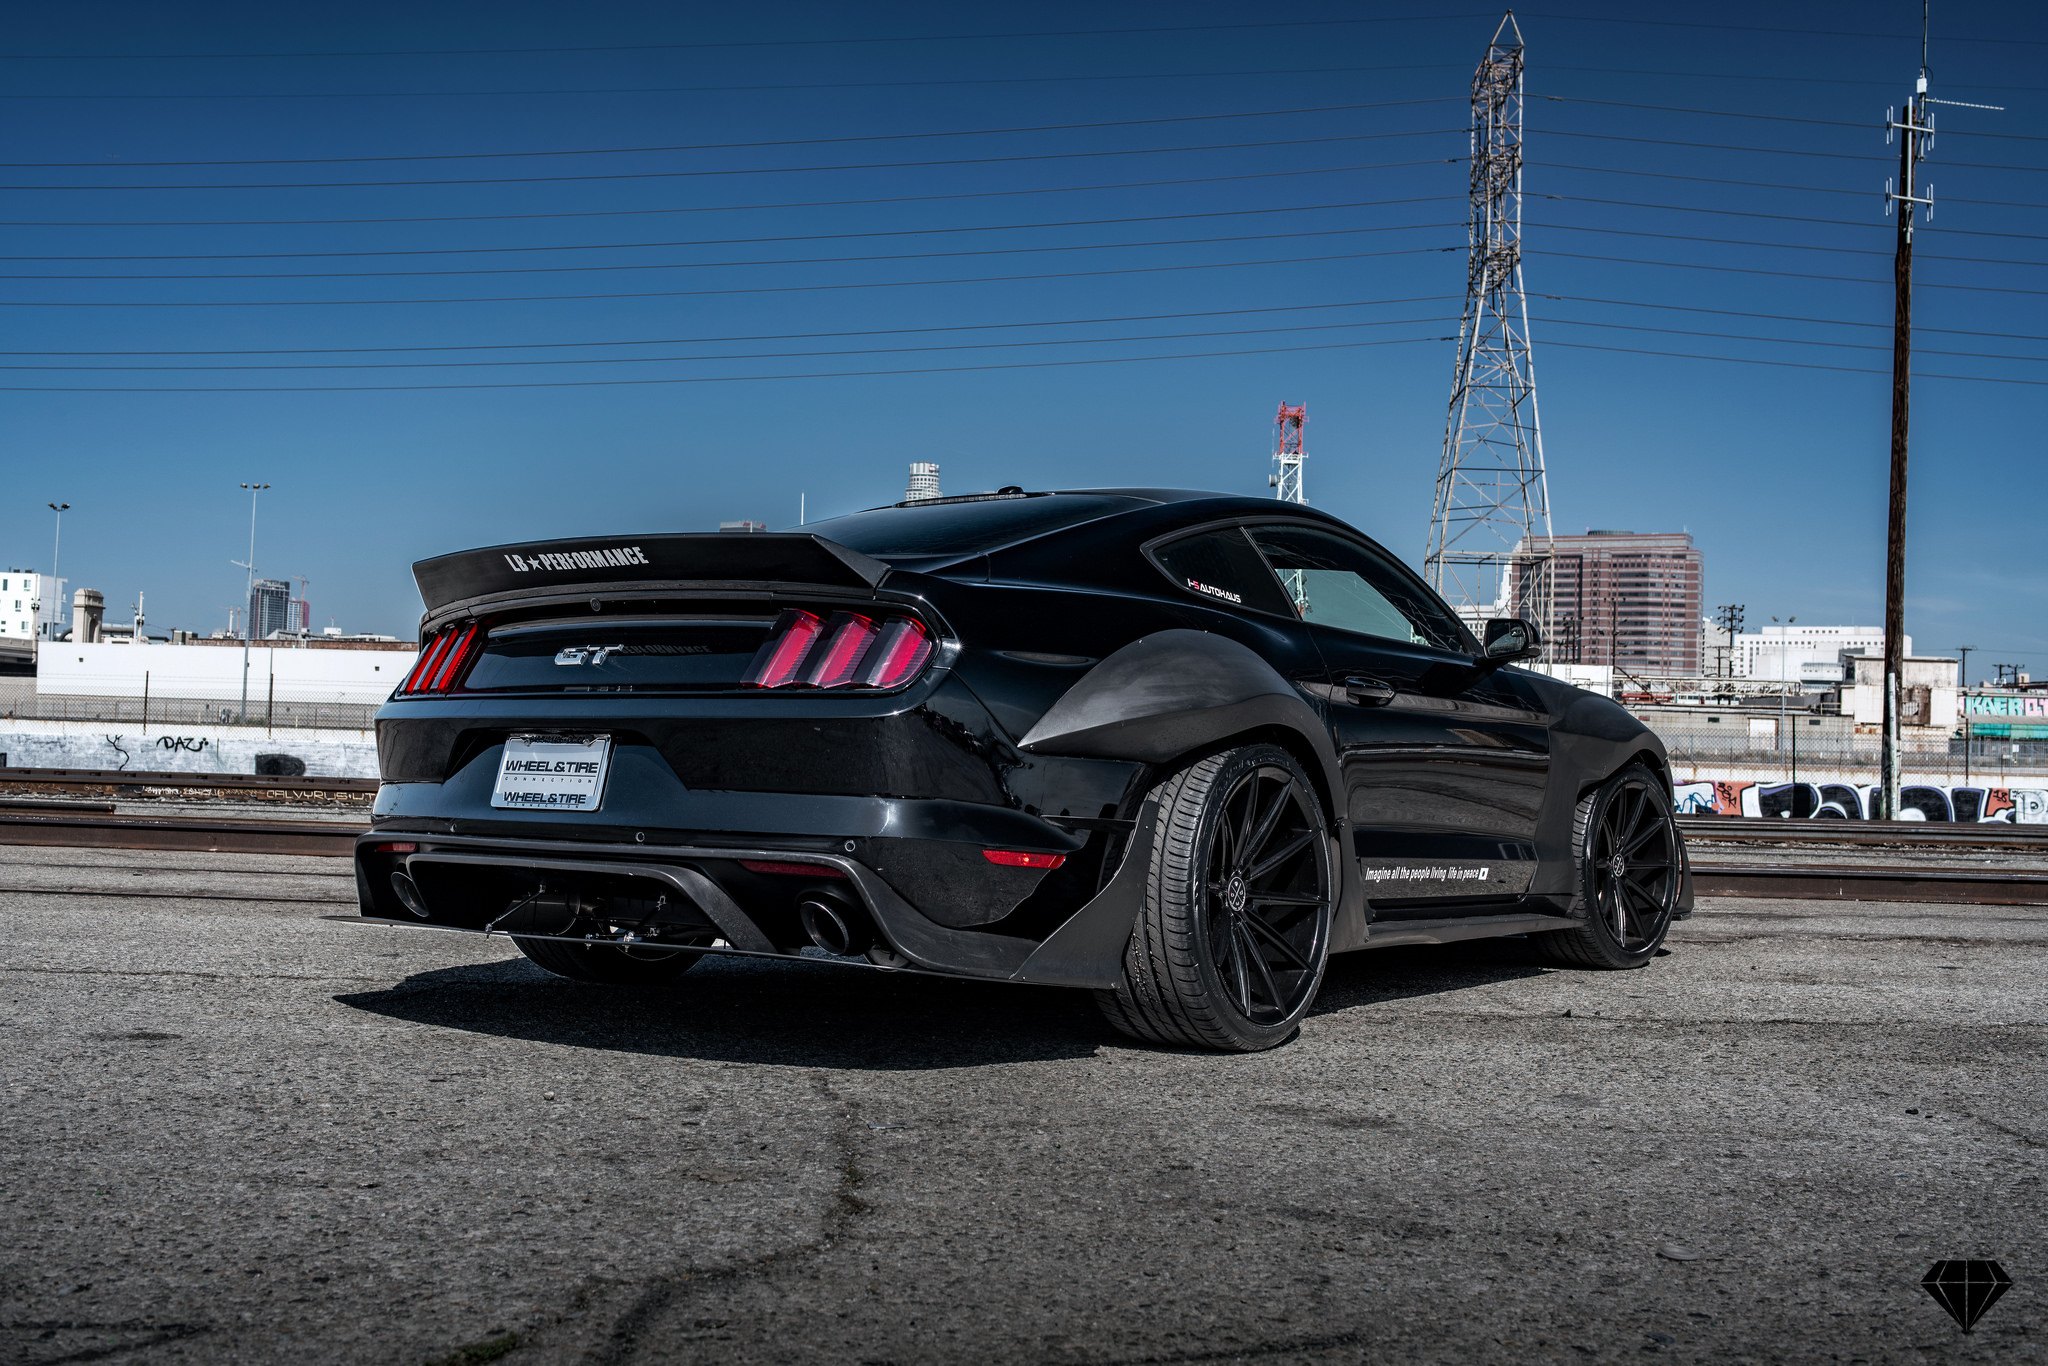 Carbon Fiber Rear Diffuser on Black Ford Mustang GT - Photo by Blaque Diamond Wheels